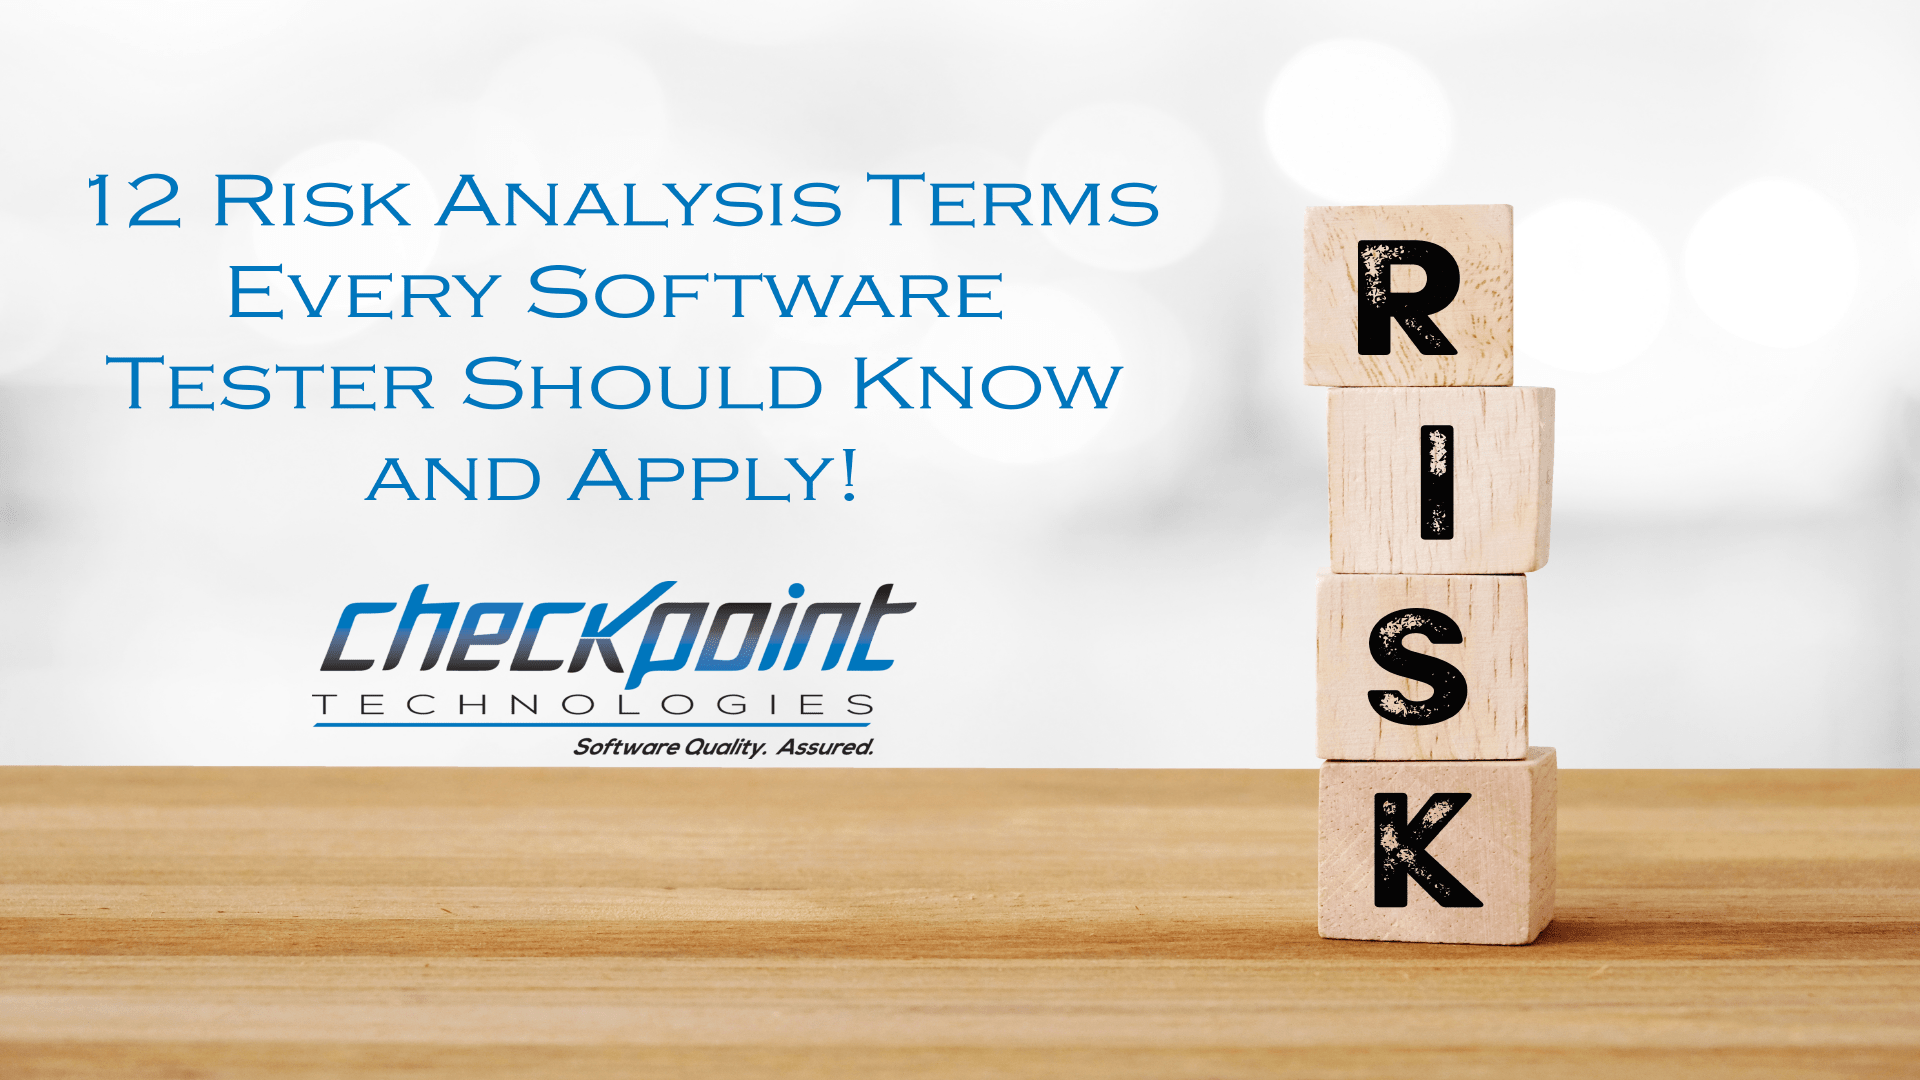 Risk Analysis Terms Every Software Tester Should Know and Apply!